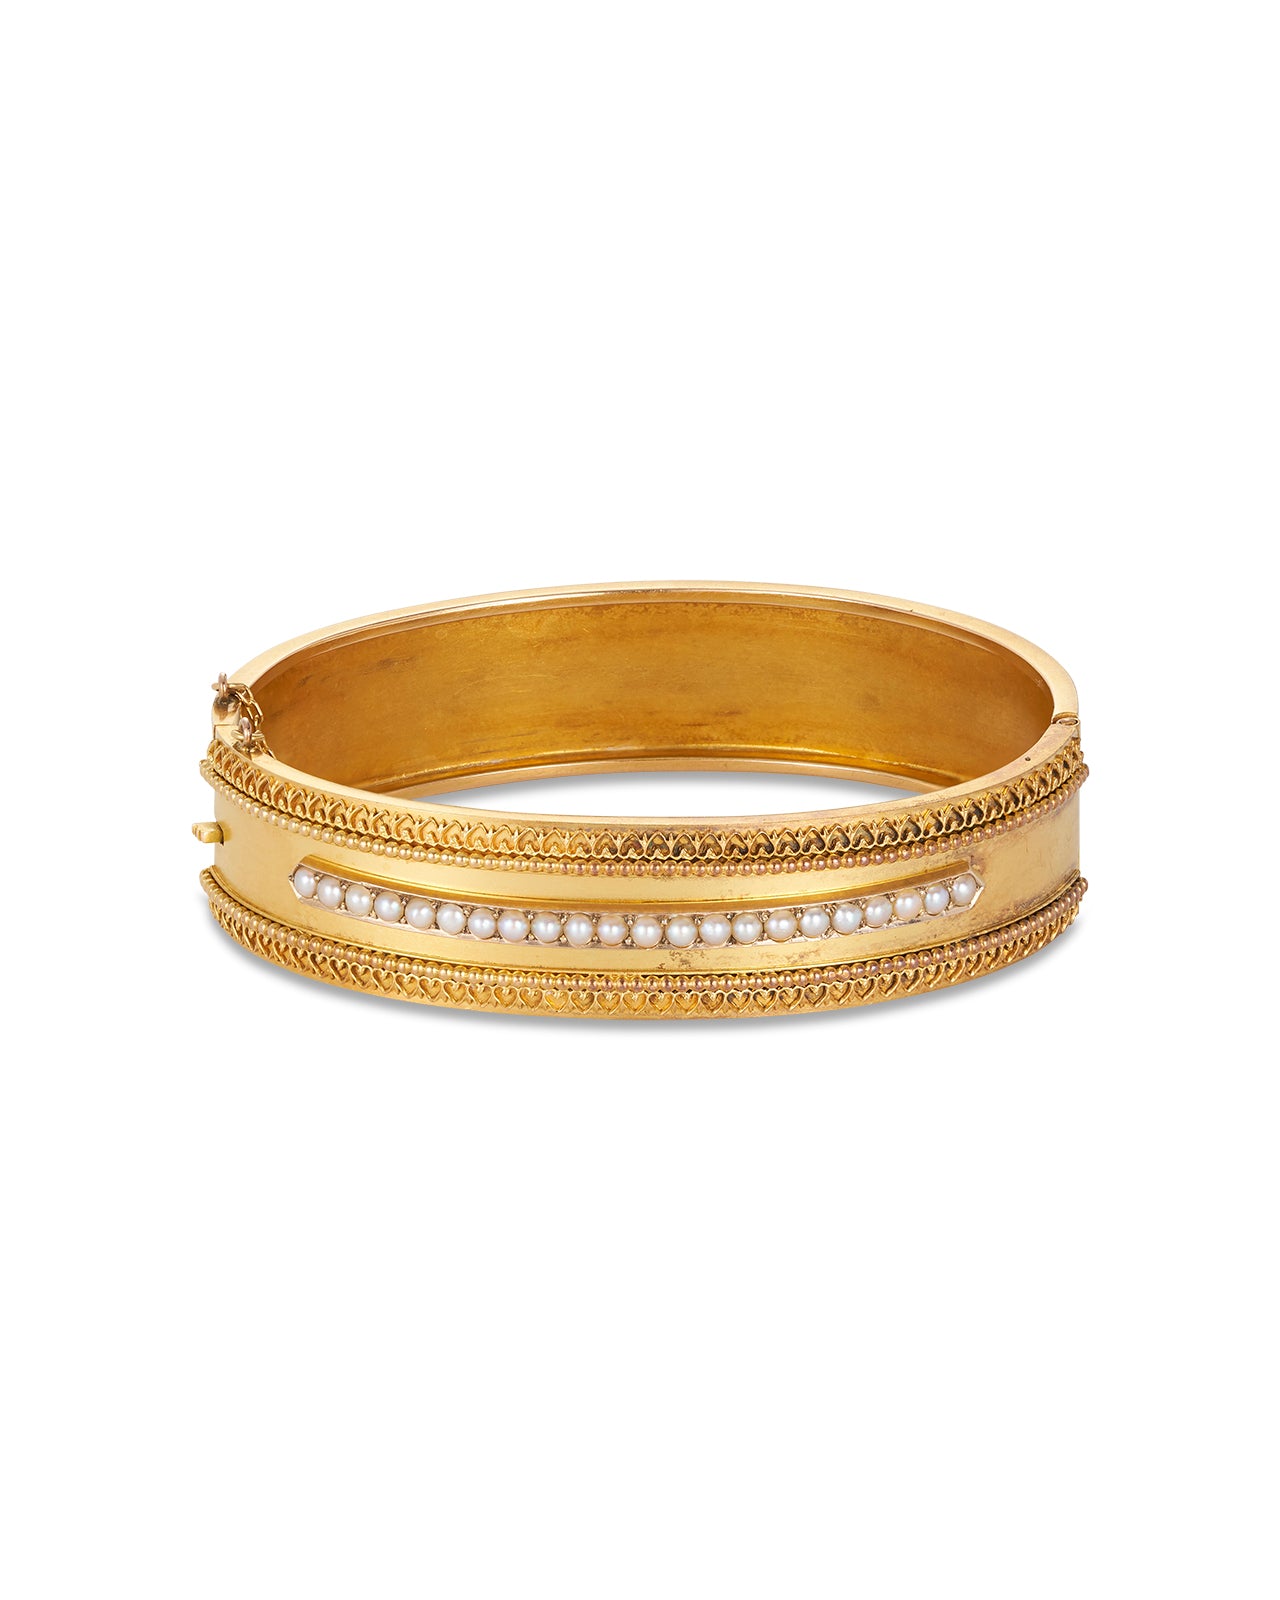 Antique Victorian Gold & Seed Pearl Bangle